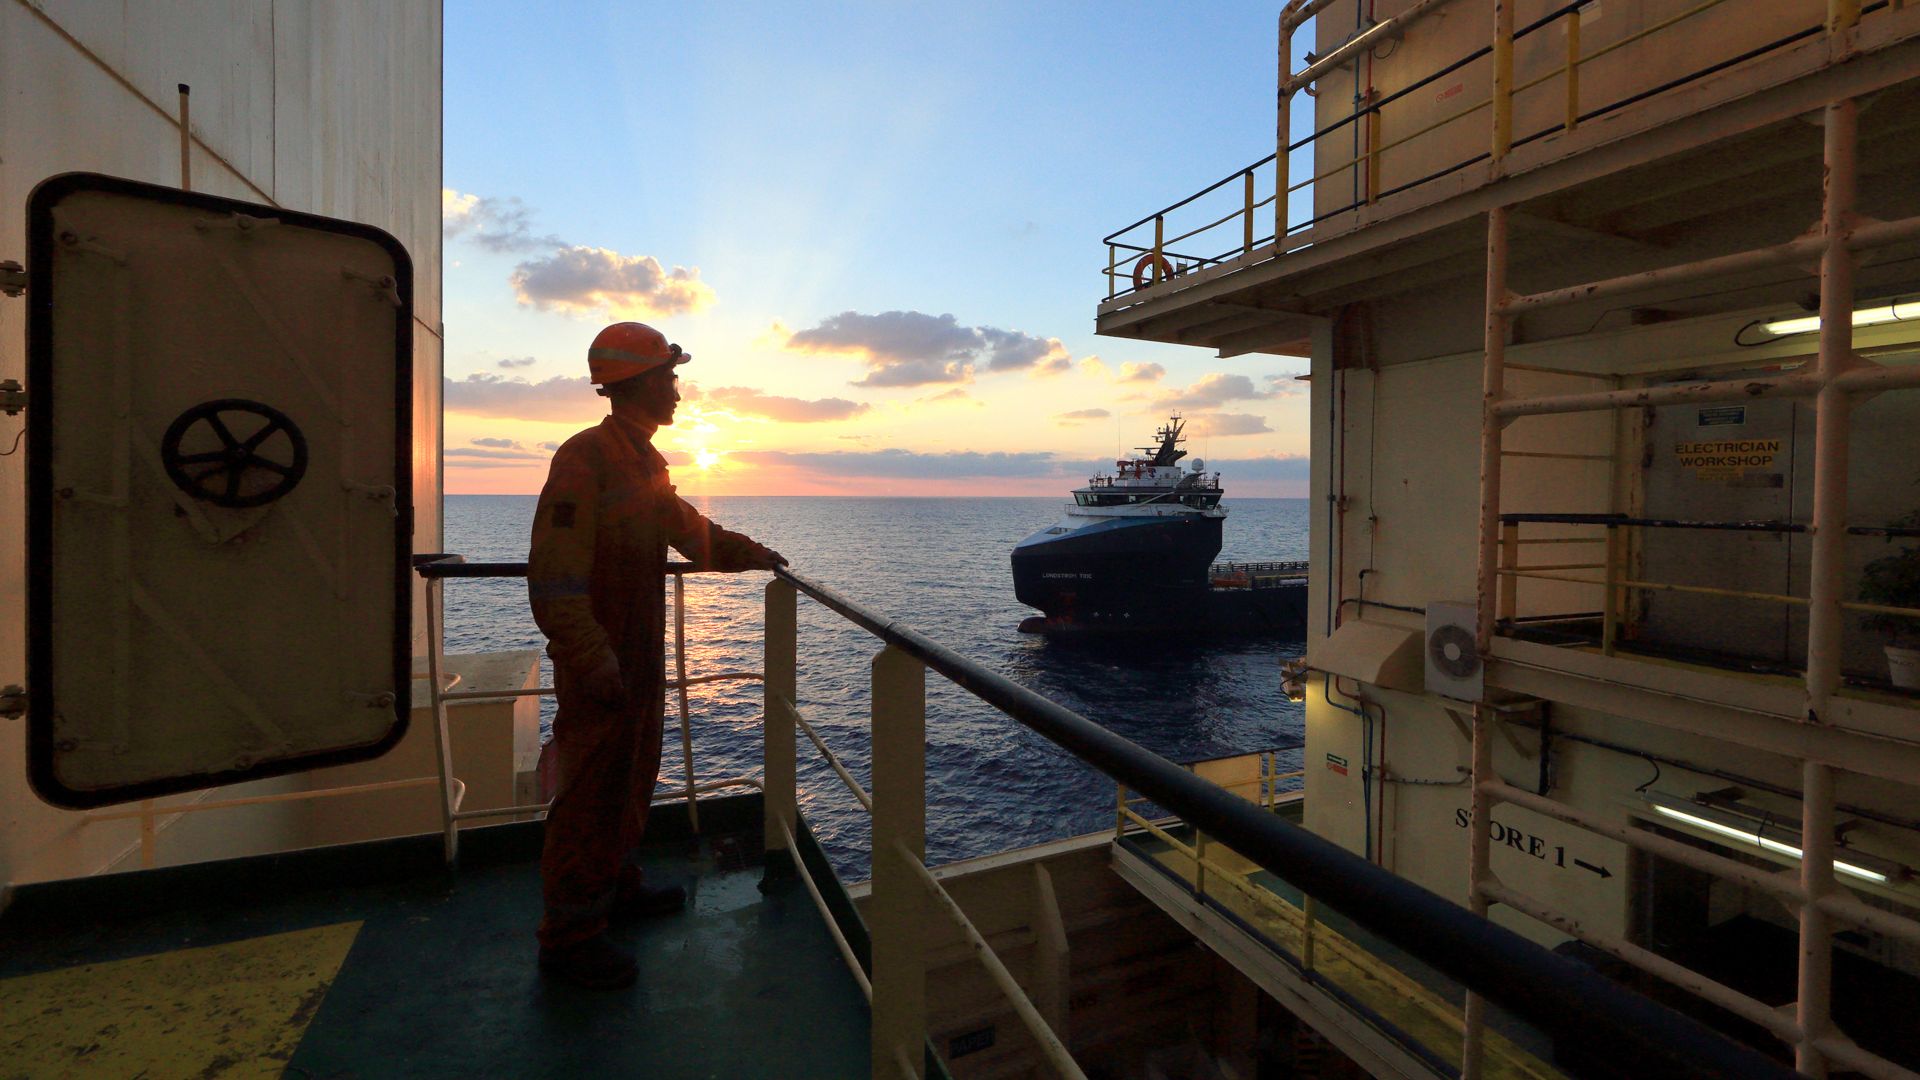 Worker on board the ship looks at the horizon